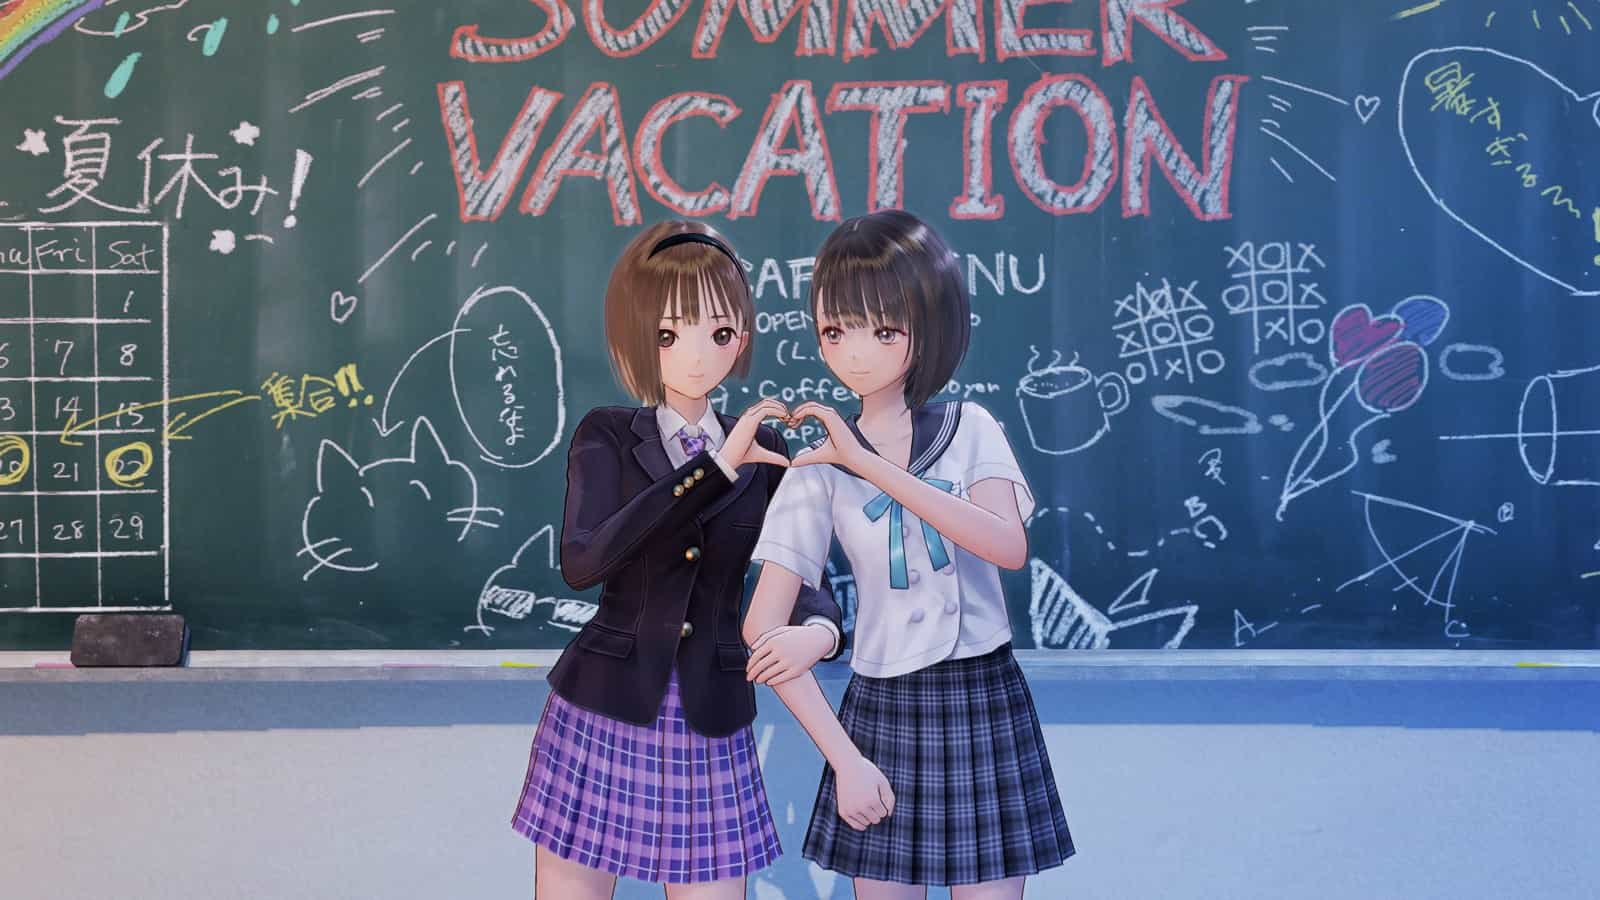 Blue Reflection: Second Light, Blue Reflection Second Light, Blue Reflection Second Light, Gust, Koei Tecmo, gameplay, features, PS4, PlayStation 4, Europe, Switch, Nintendo Switch, Release date, Trailer, screenshots, pre-order, Japan Version, Asia Version, Chinese Subtitles